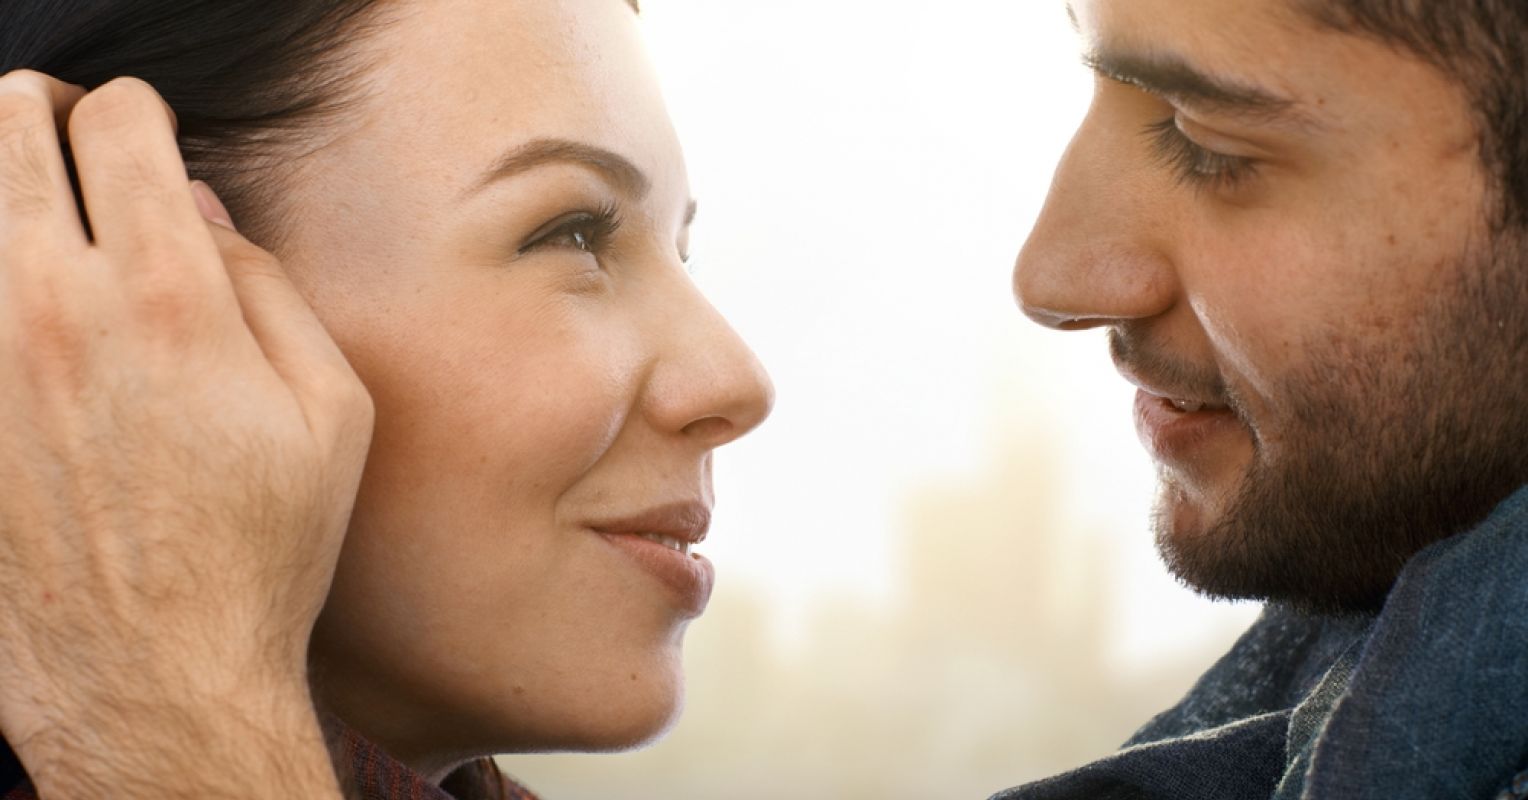 The 11 Reasons We Fall in Love | Psychology Today